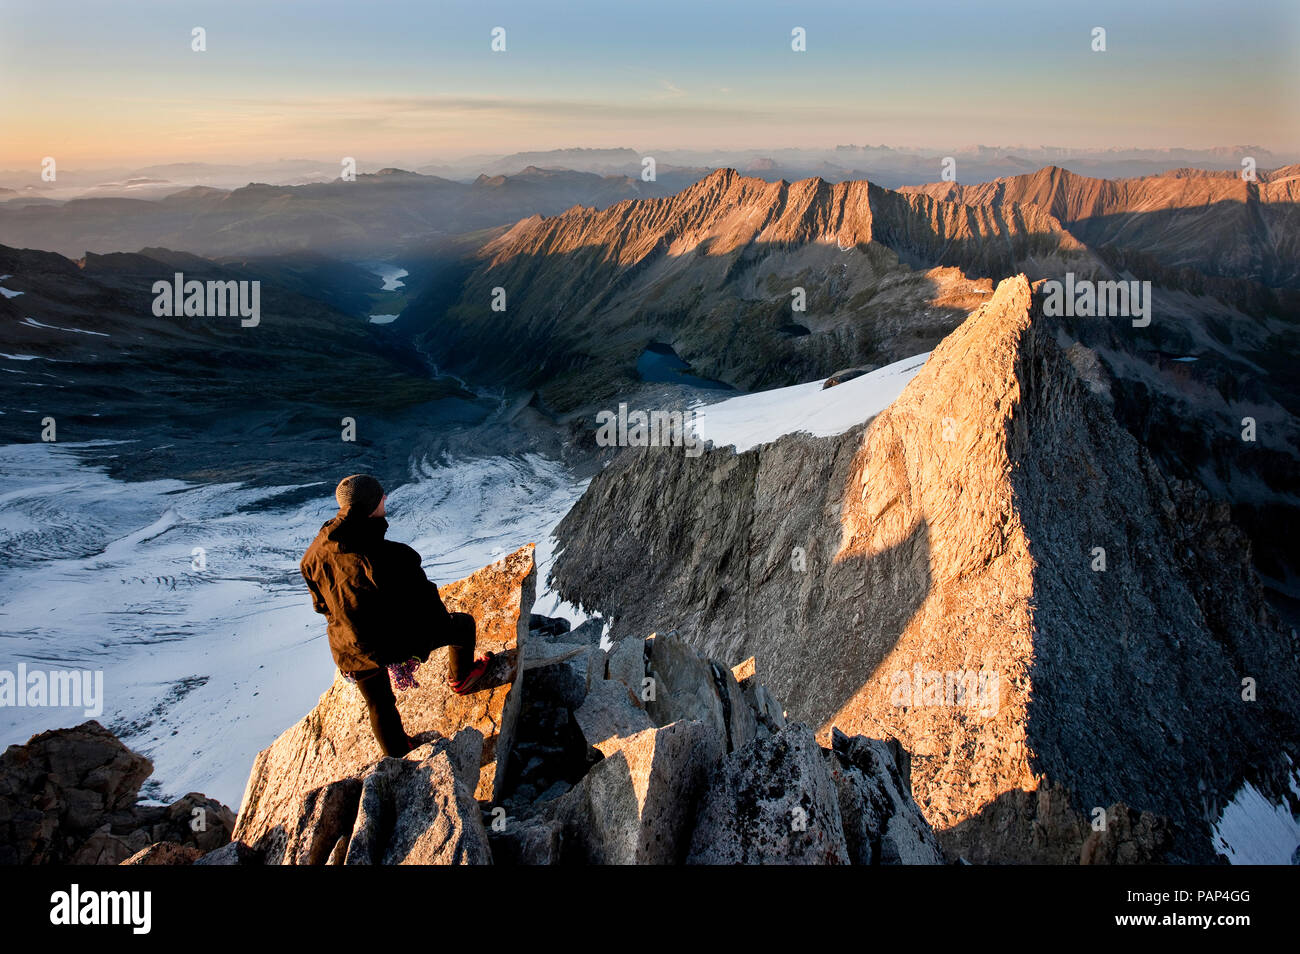 Austria, Tyrol, Zillertal Alps, View from Reichenspitze, climber at glaciated mountains at sunrise, Wildgerlostal, High Tauern National Park Stock Photo